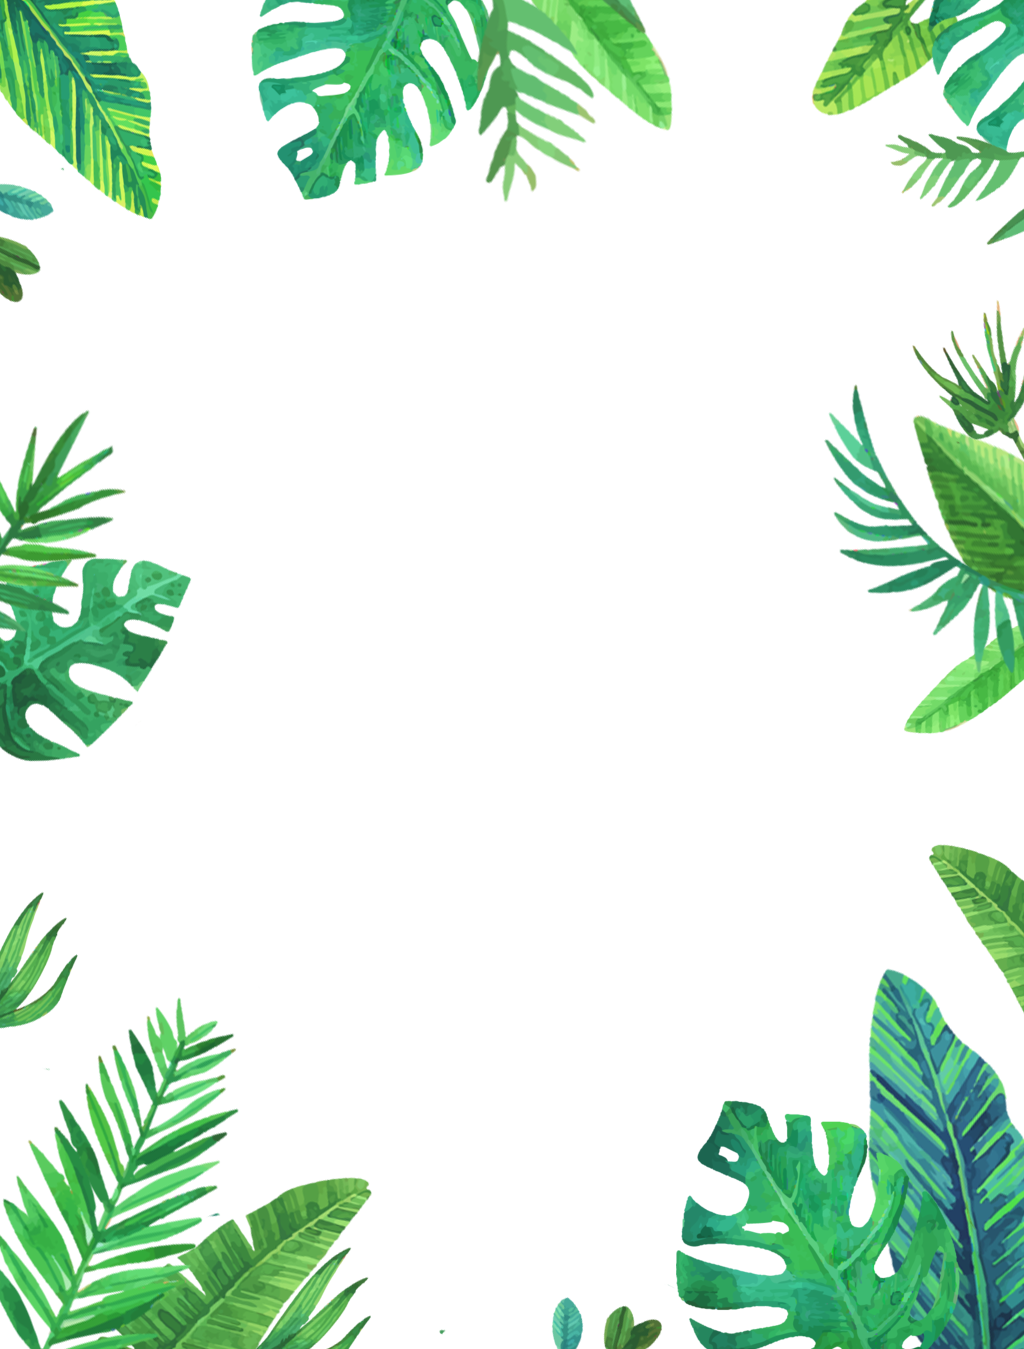 Clipart leaf frame. Leaves green tropical palms